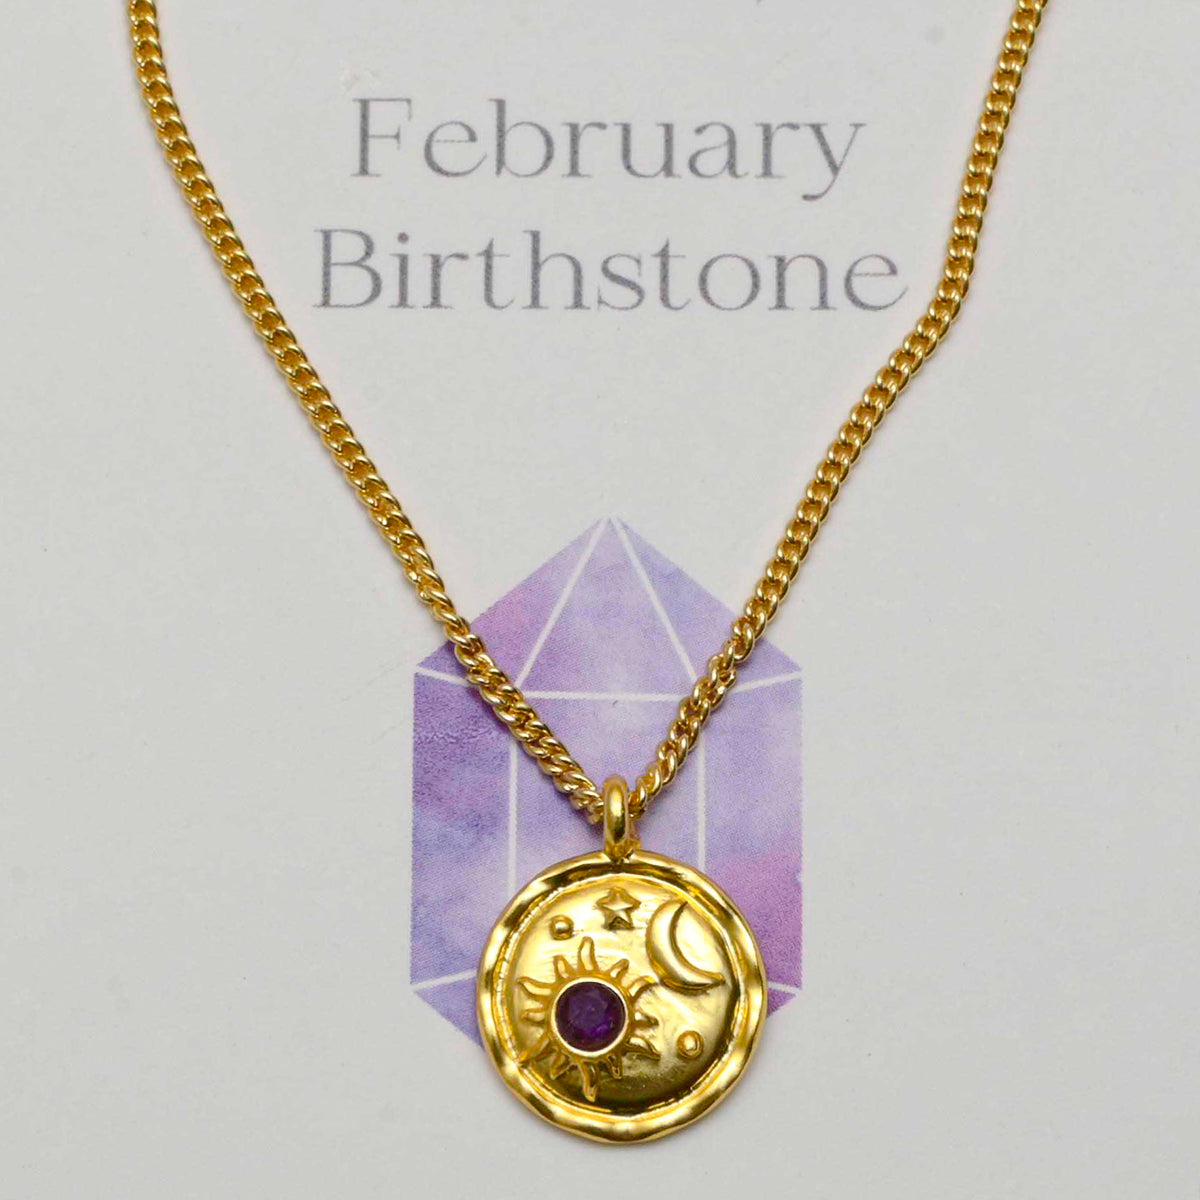 February Birthstone Necklace With Amethyst